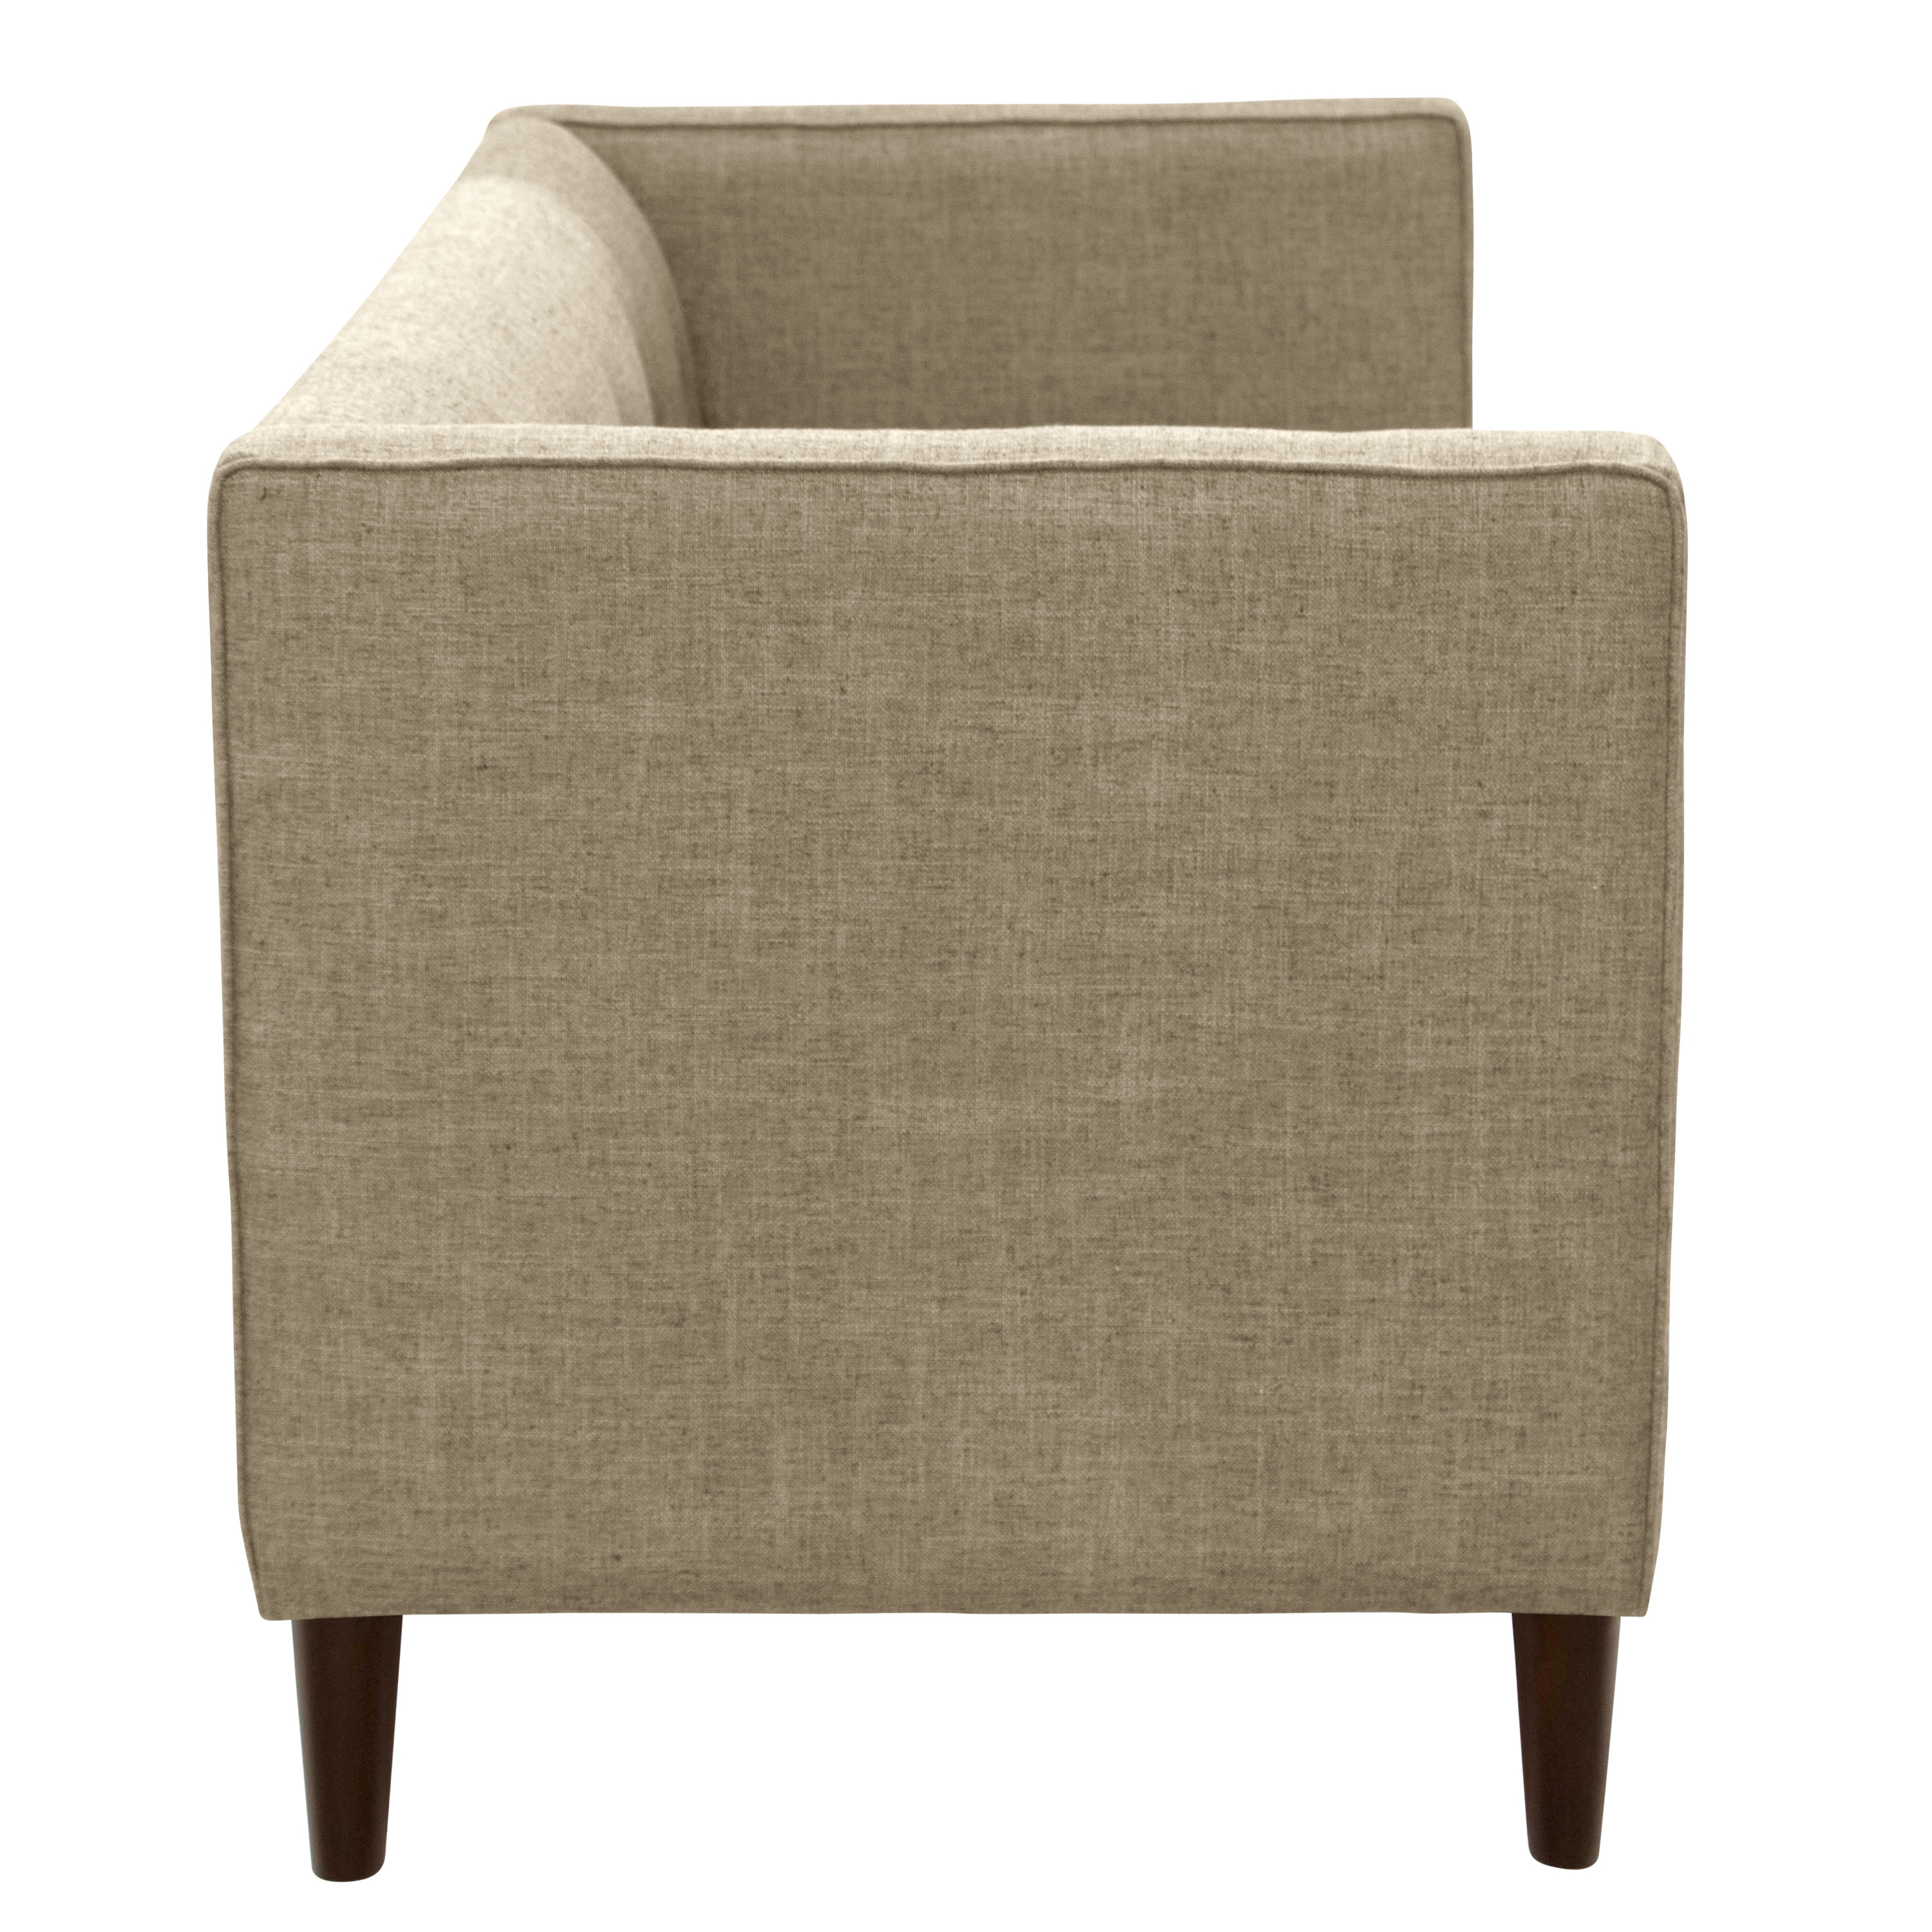 Downing Settee, Linen - DNU - Image 2